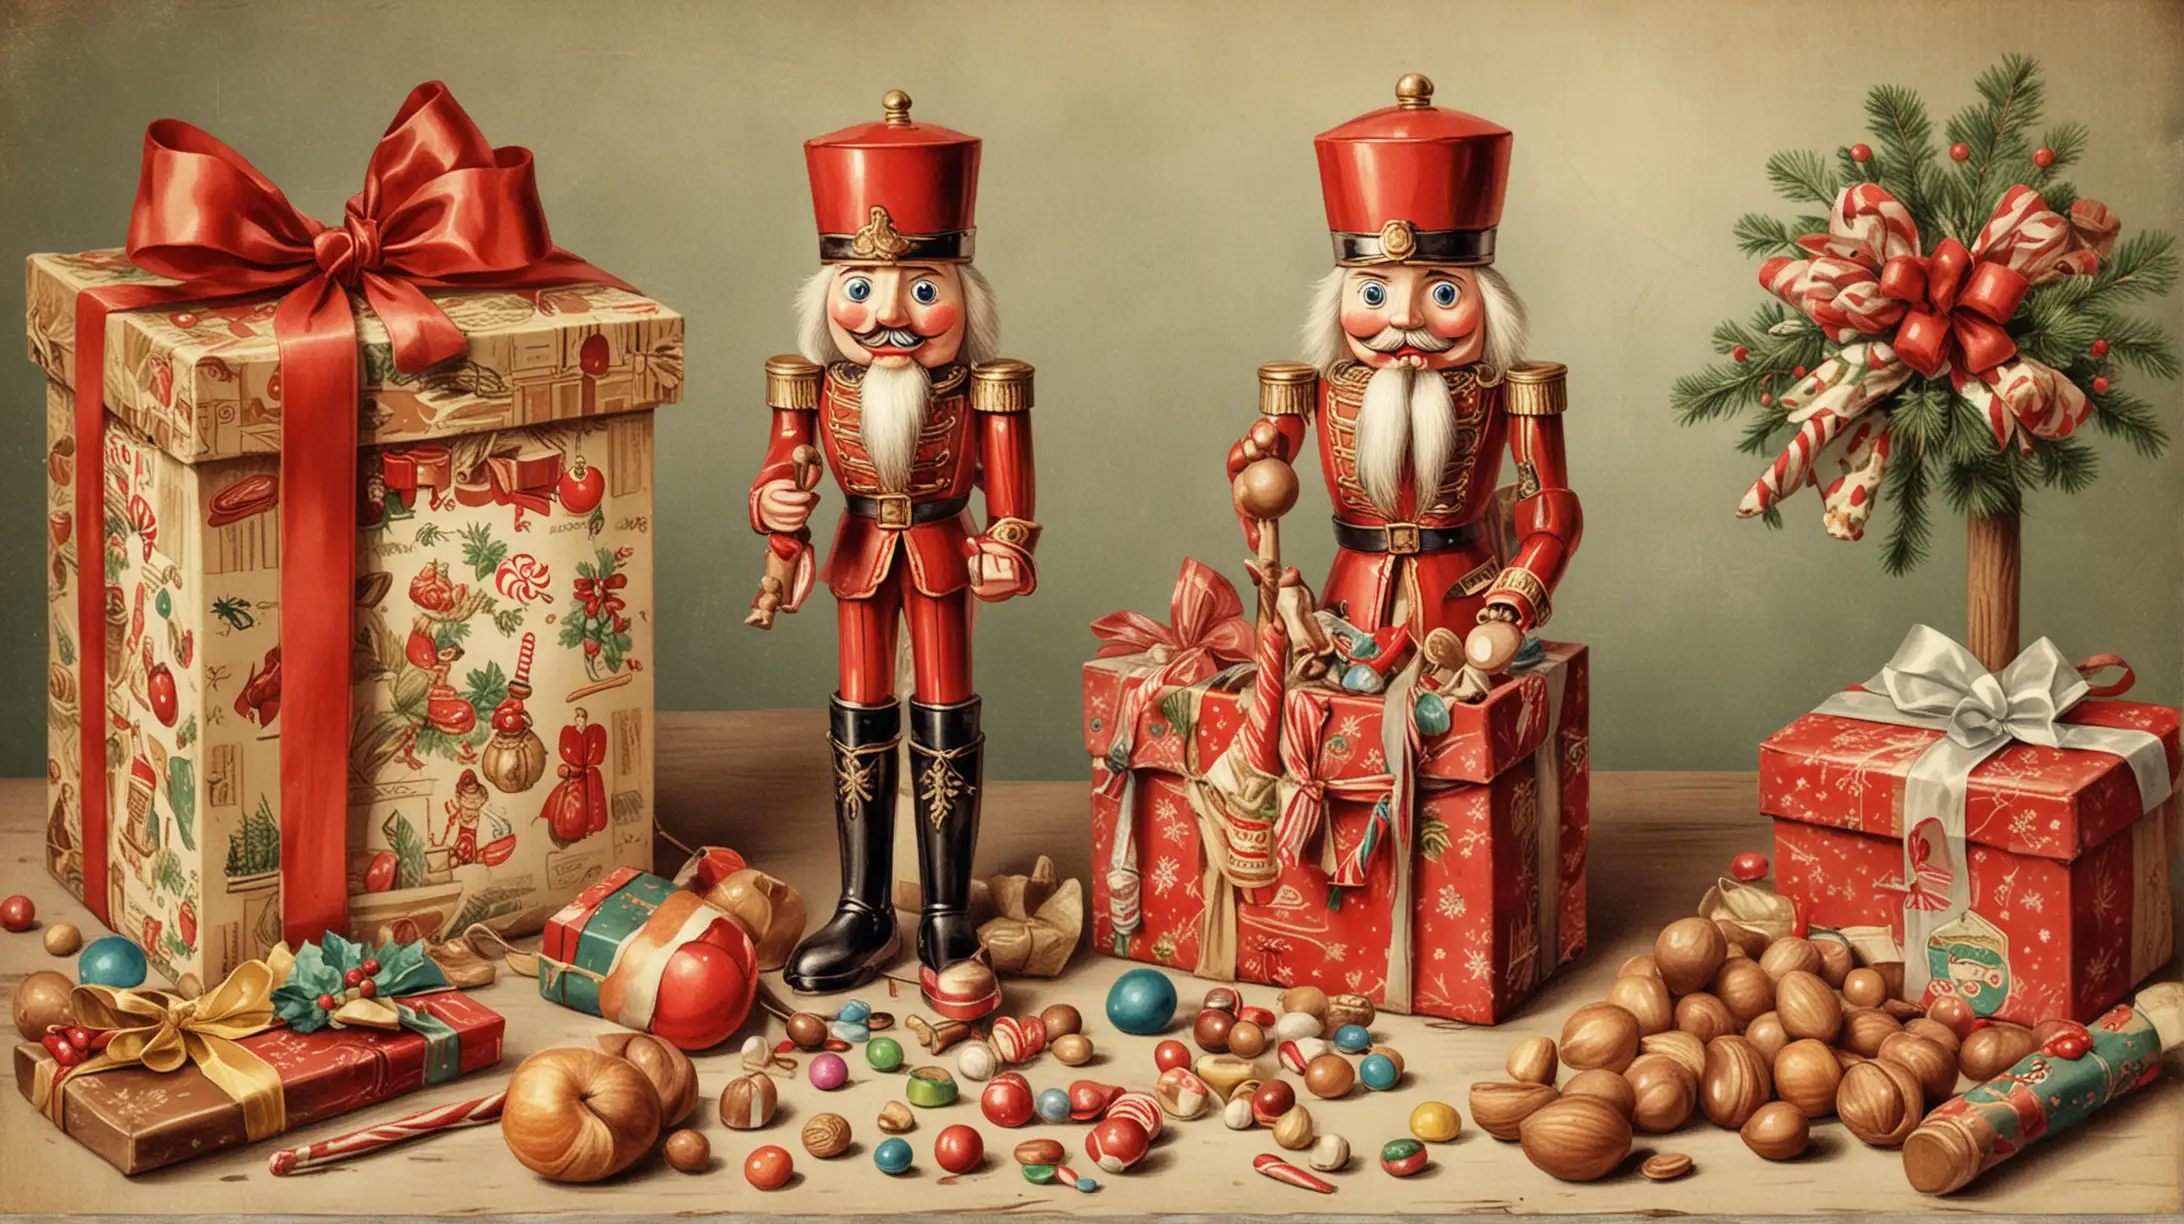 Nut cracker with candy and christmas gifts old looking vintage illustration 